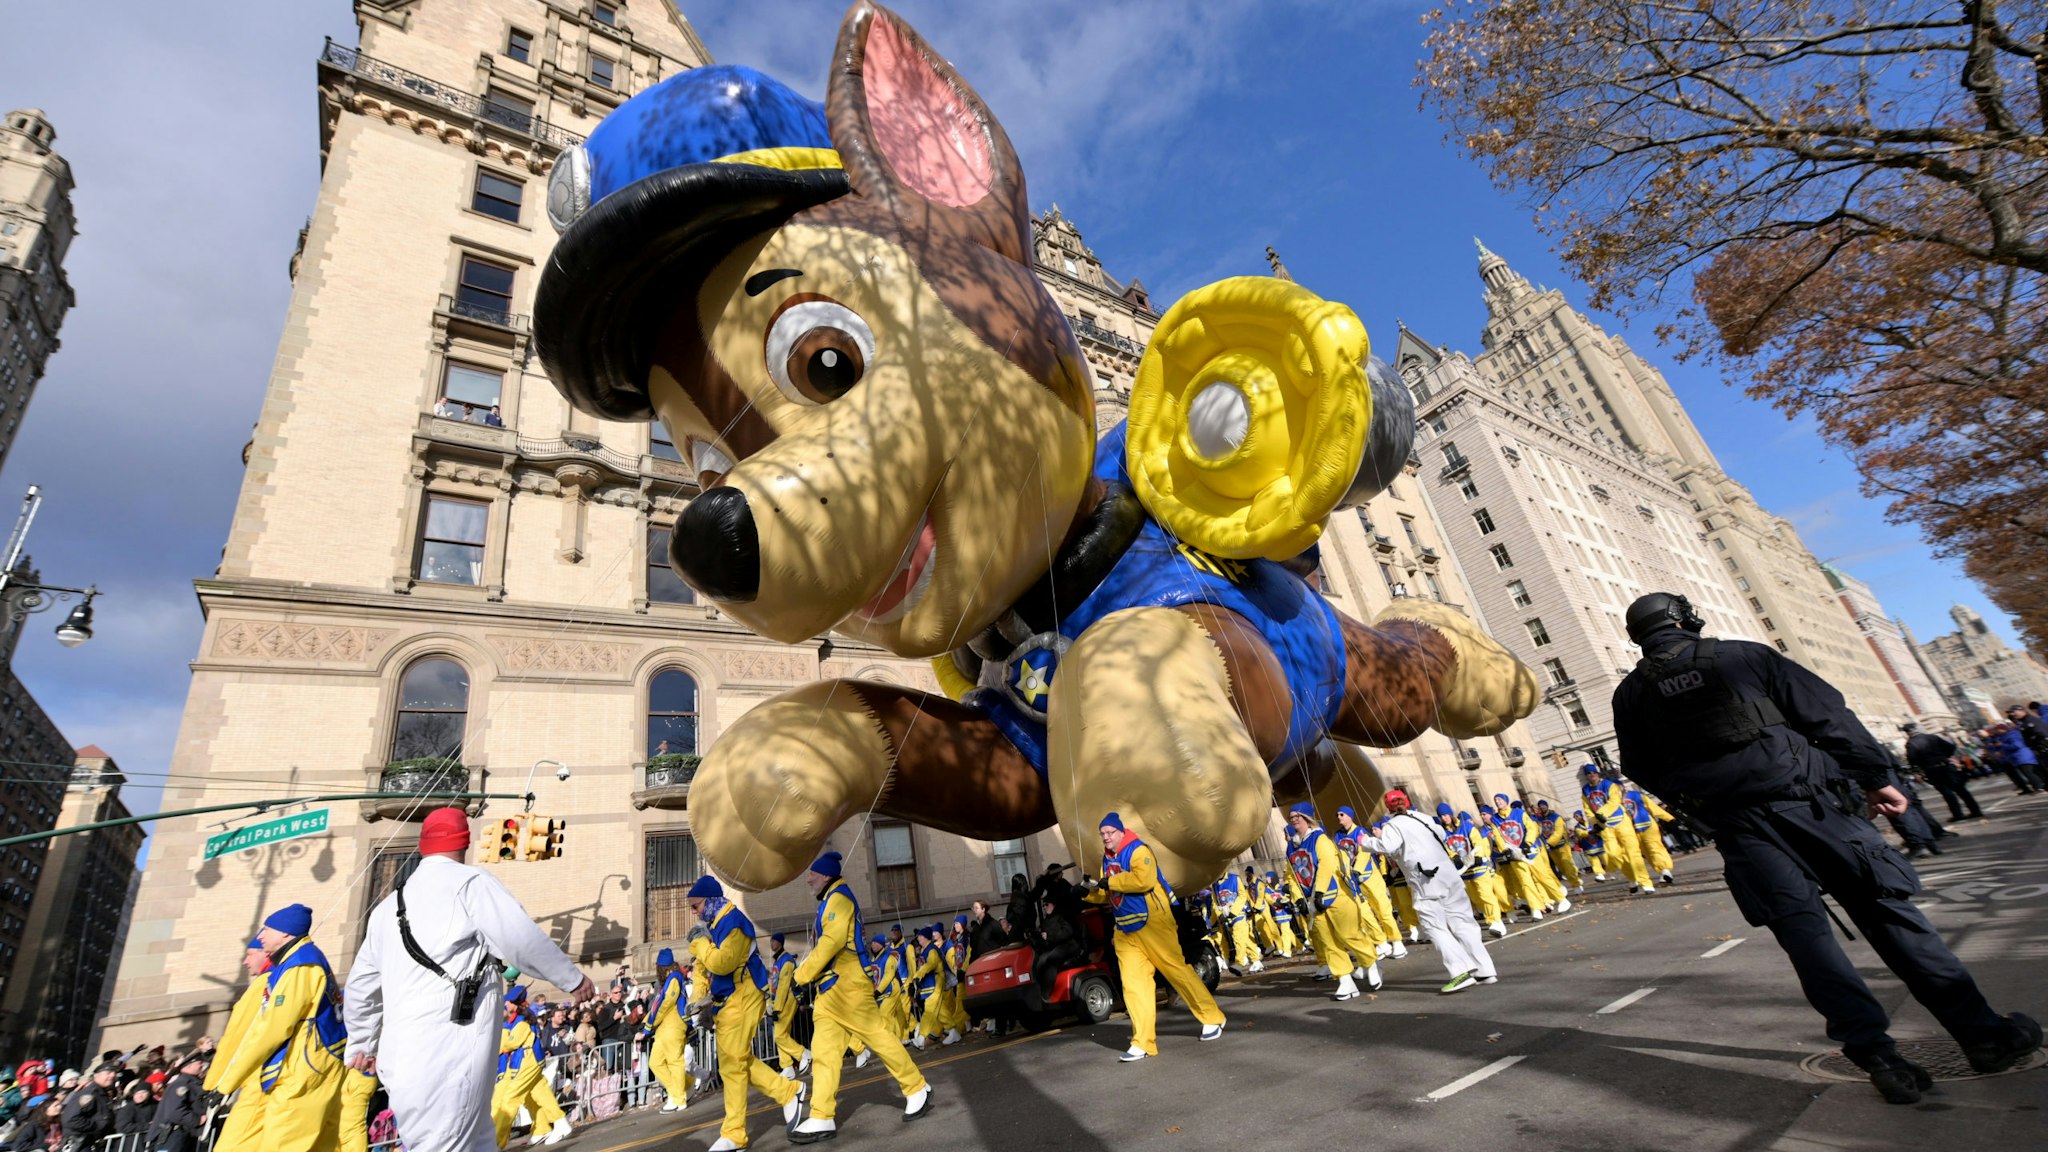 NEW YORK, NEW YORK - NOVEMBER 28: The Paw Patrol balloon balloon floats low down the parade route during the 93rd Annual Macy's Thanksgiving Day Parade on November 28, 2019 in New York City. (Photo by Michael Loccisano/Getty Images)